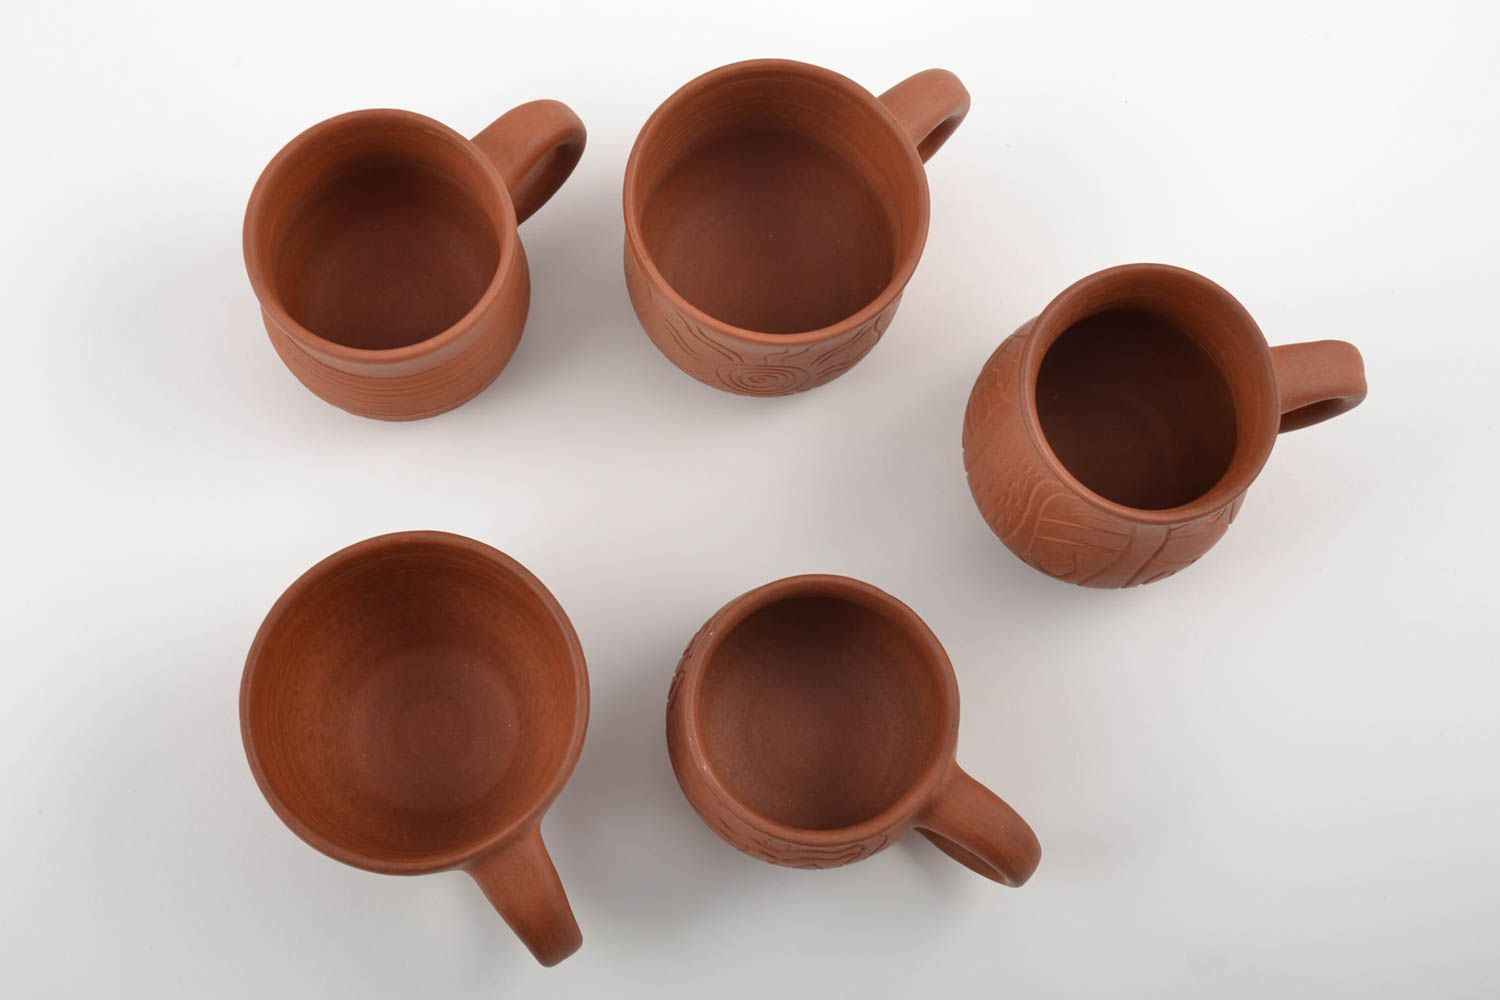 Set of 5 absolutely different terracotta color ceramic coffee mugs 3 oz each photo 3